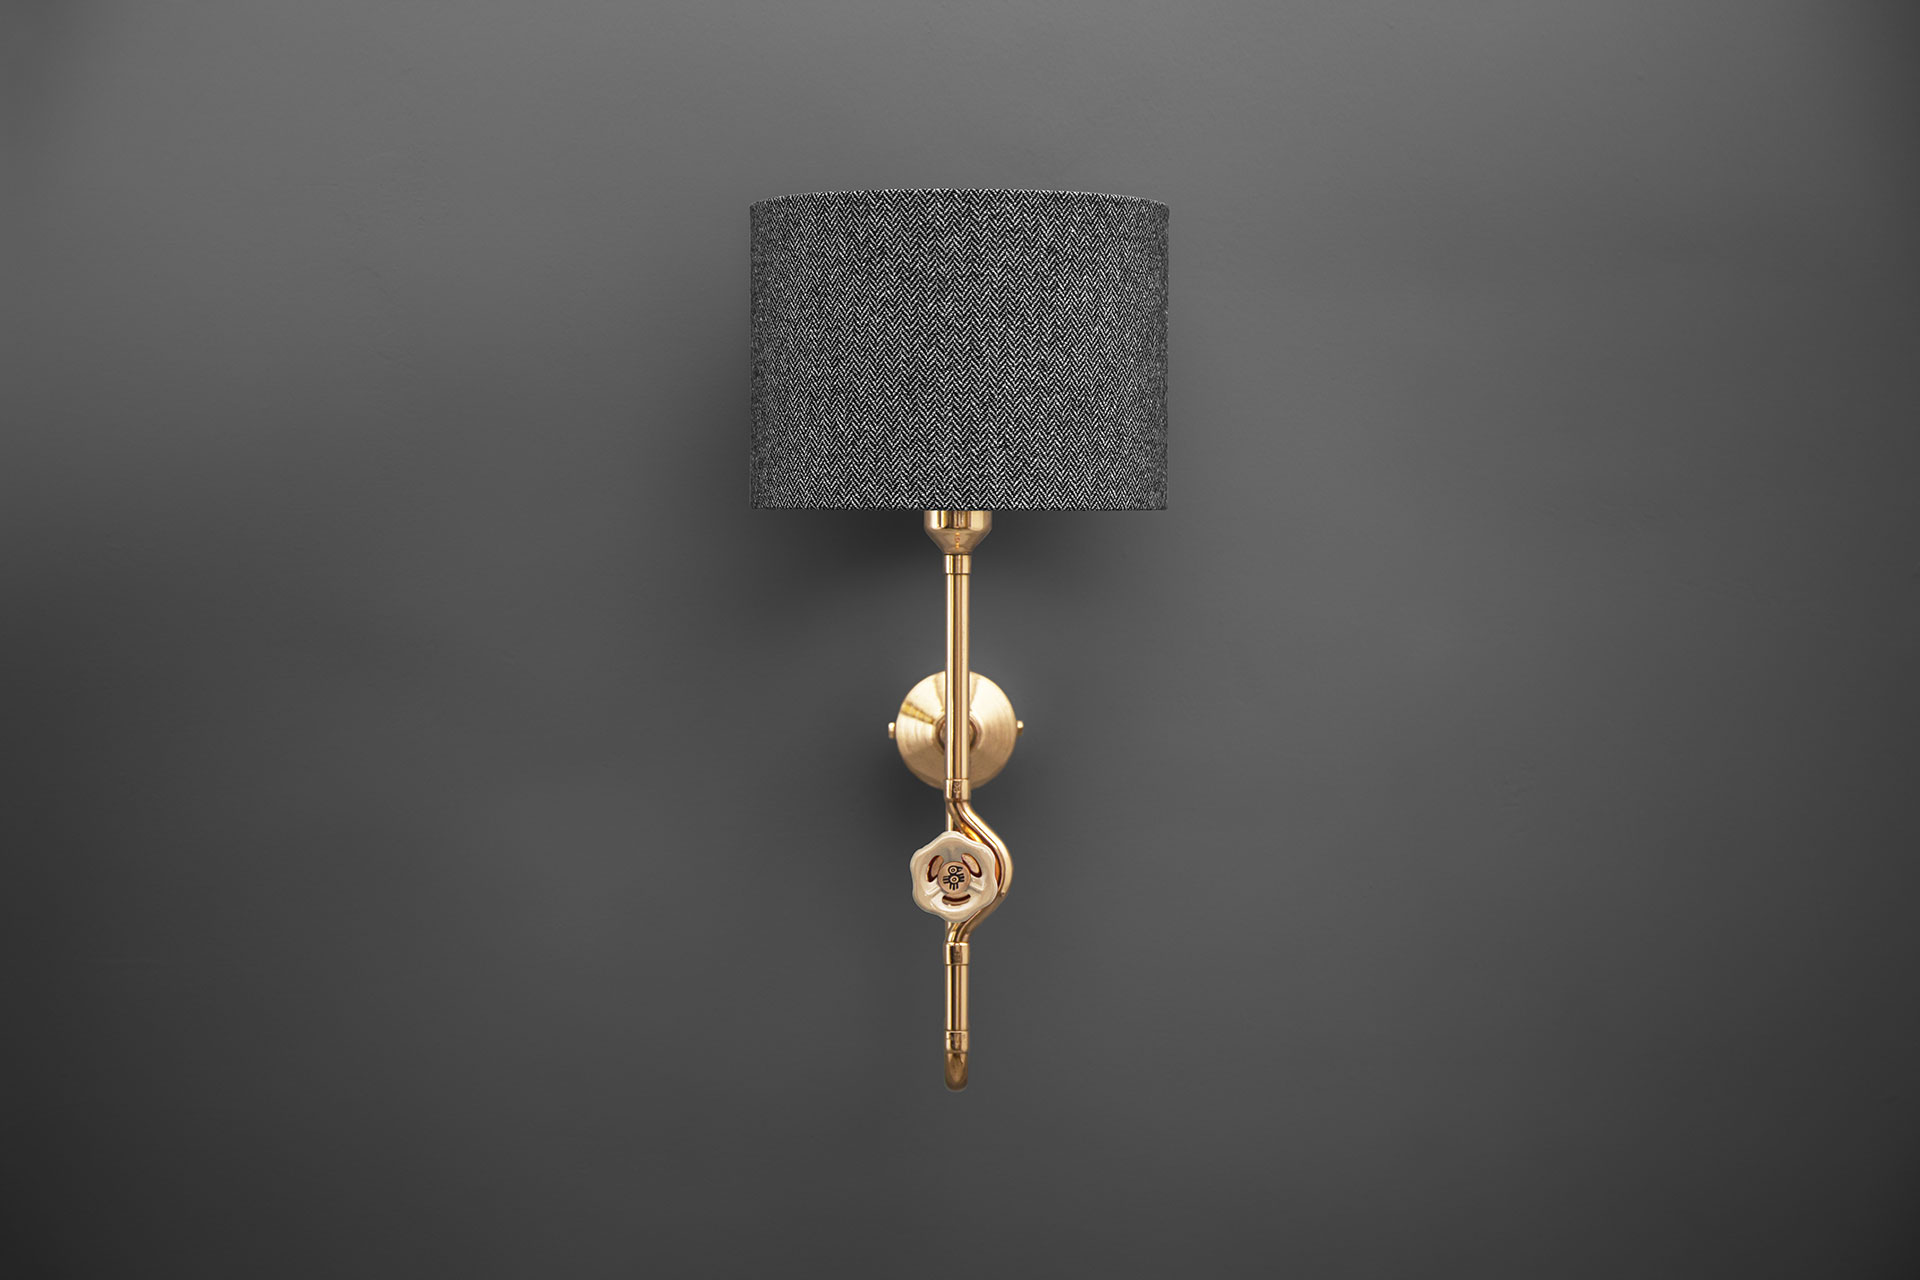 Designers sconce with tweed shade and knob dimmer